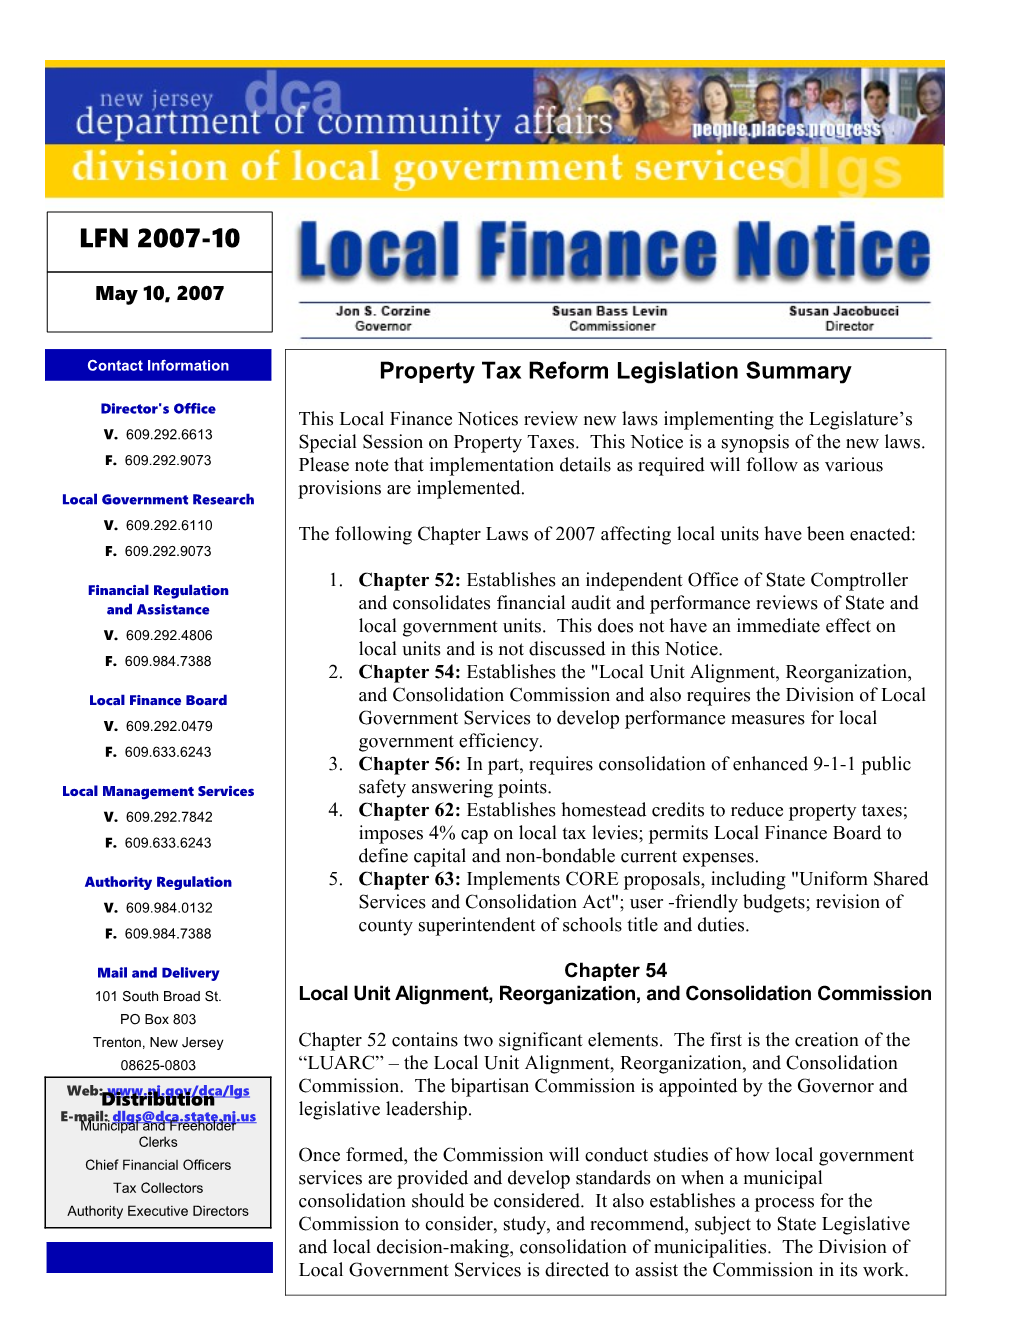 Local Finance Notice 2007-10May 11, 2007Page 1